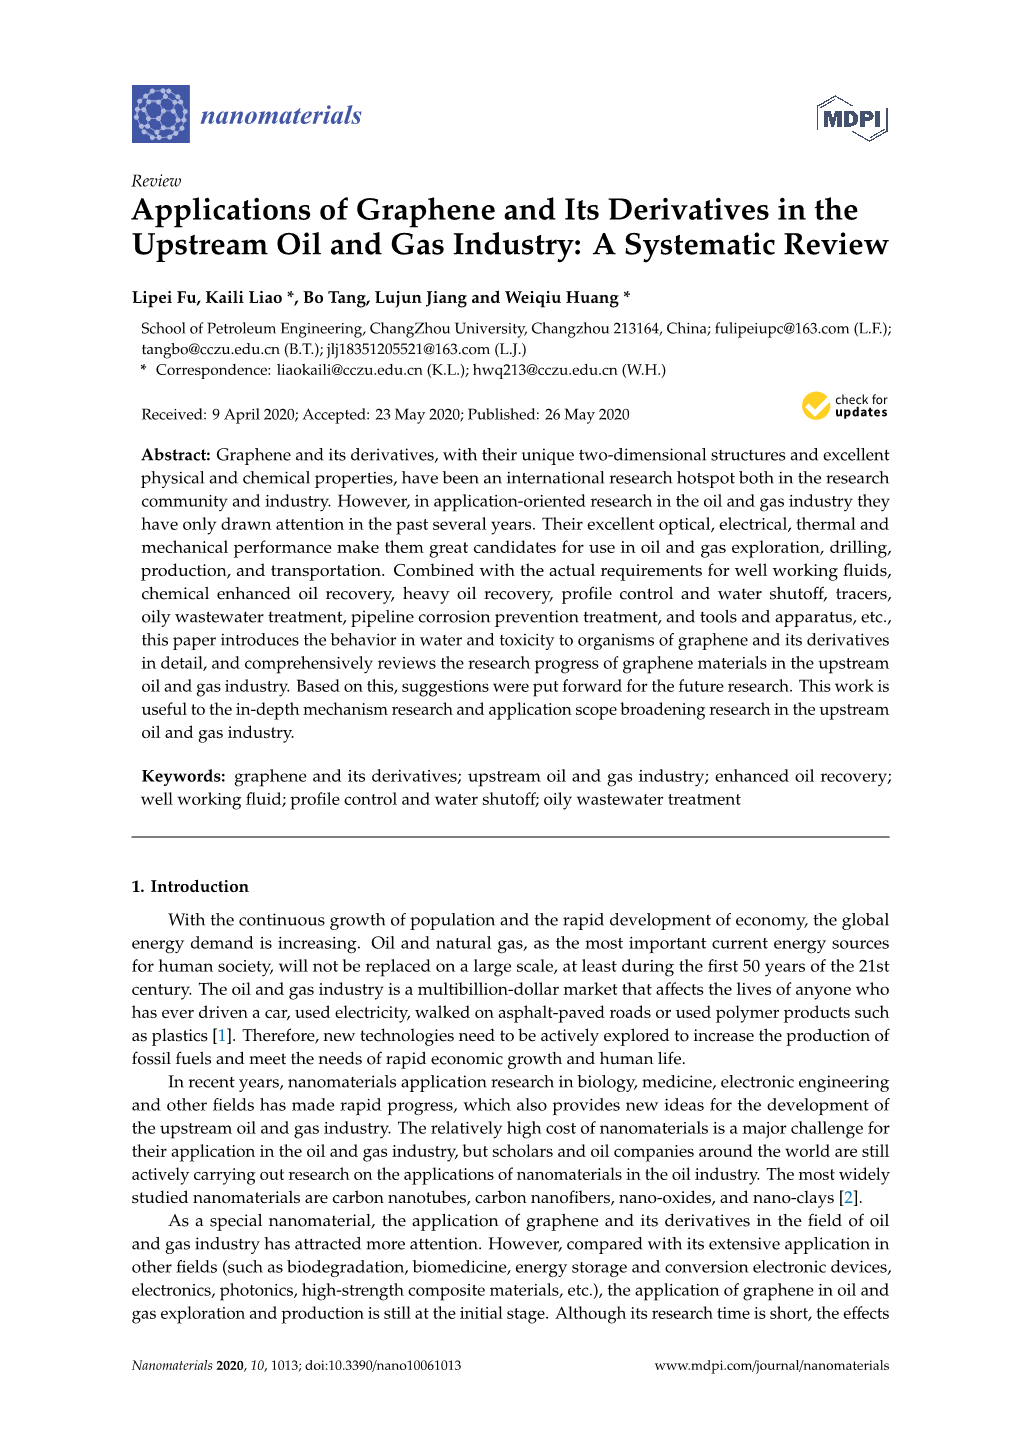 Applications of Graphene and Its Derivatives in the Upstream Oil and Gas Industry: a Systematic Review